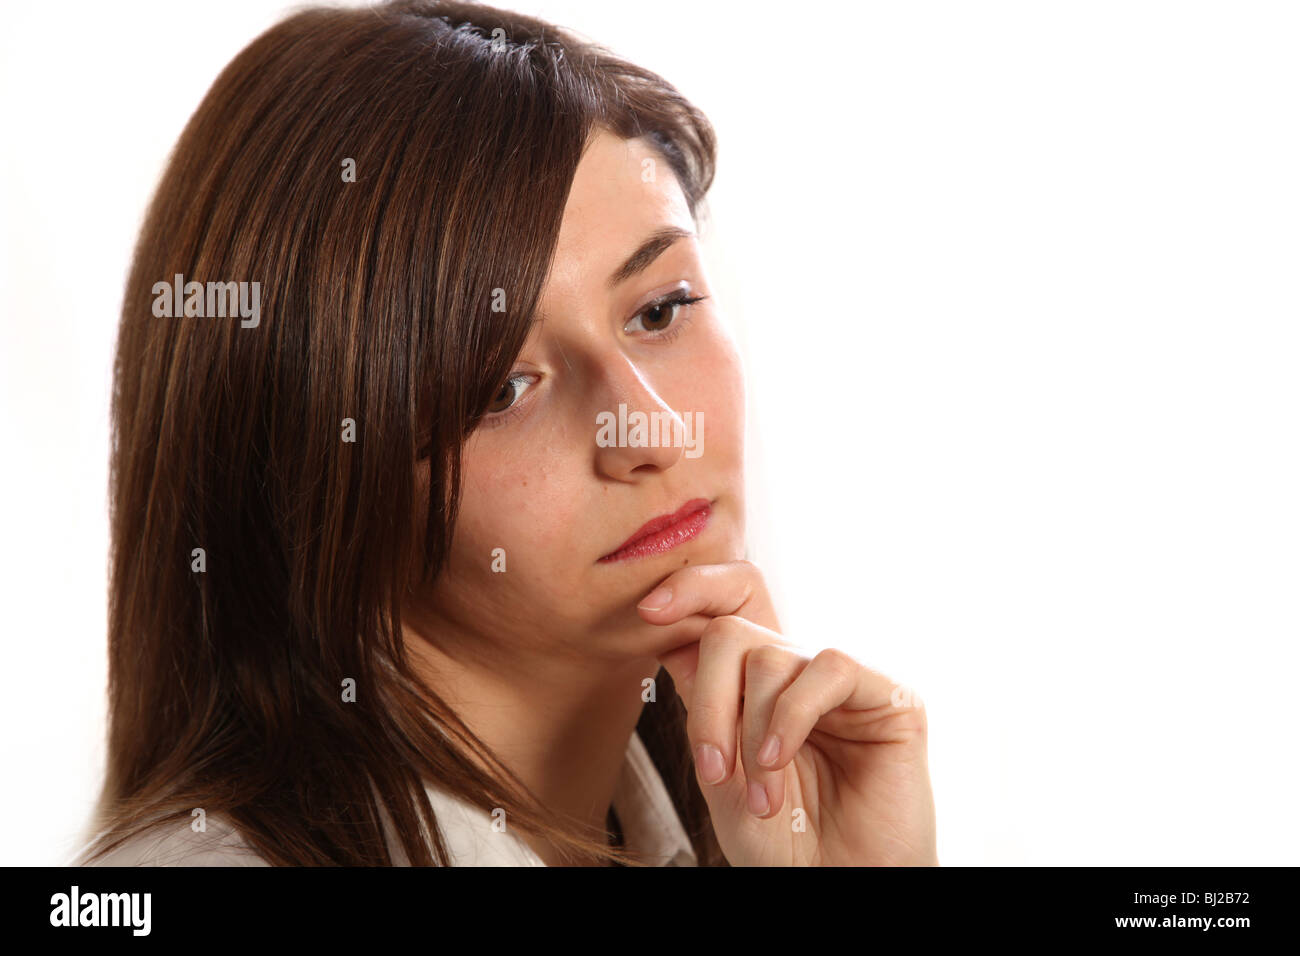 young, sad woman that looks sad and depressed to the floor. Stock Photo